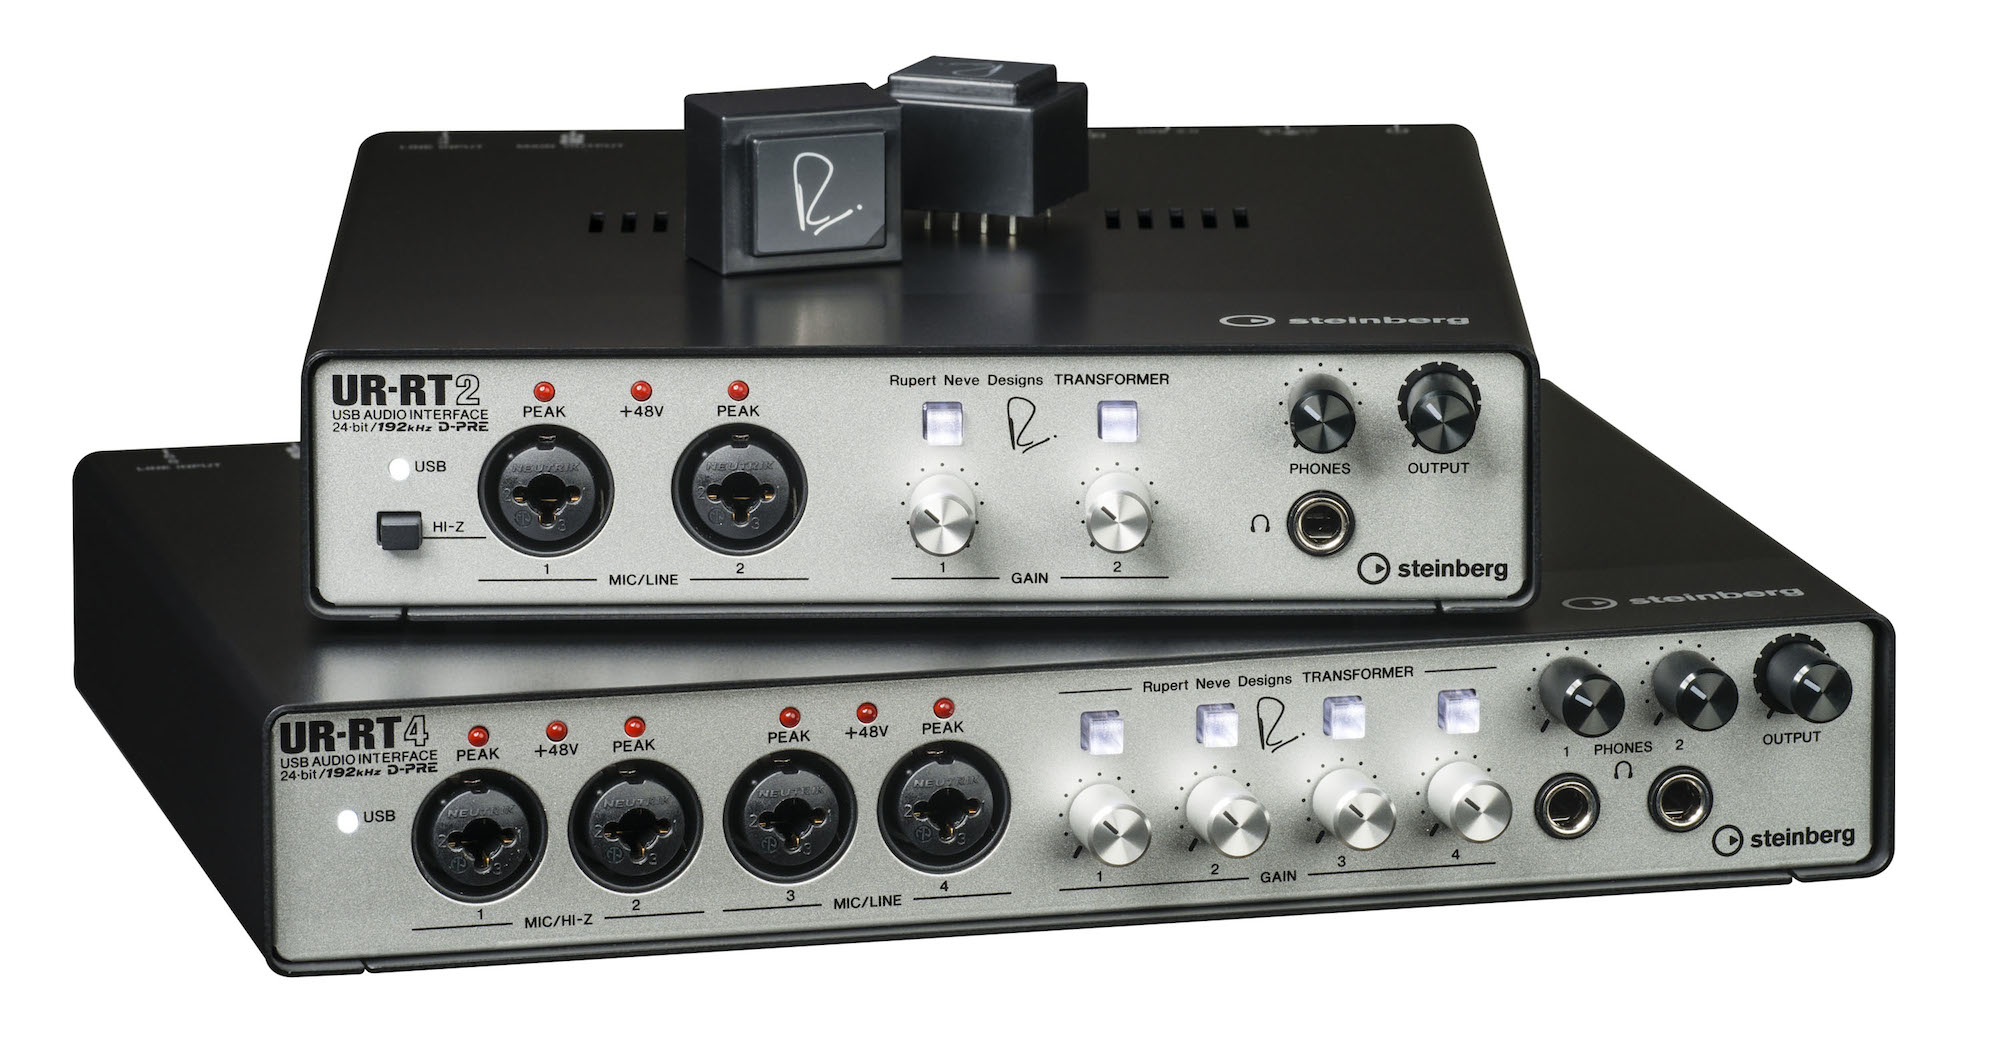 New Gear Alert: Steinberg & Rupert Neve Interface Line, Reason Lite With Akai, Roland R-07 Mobile Recorder & More